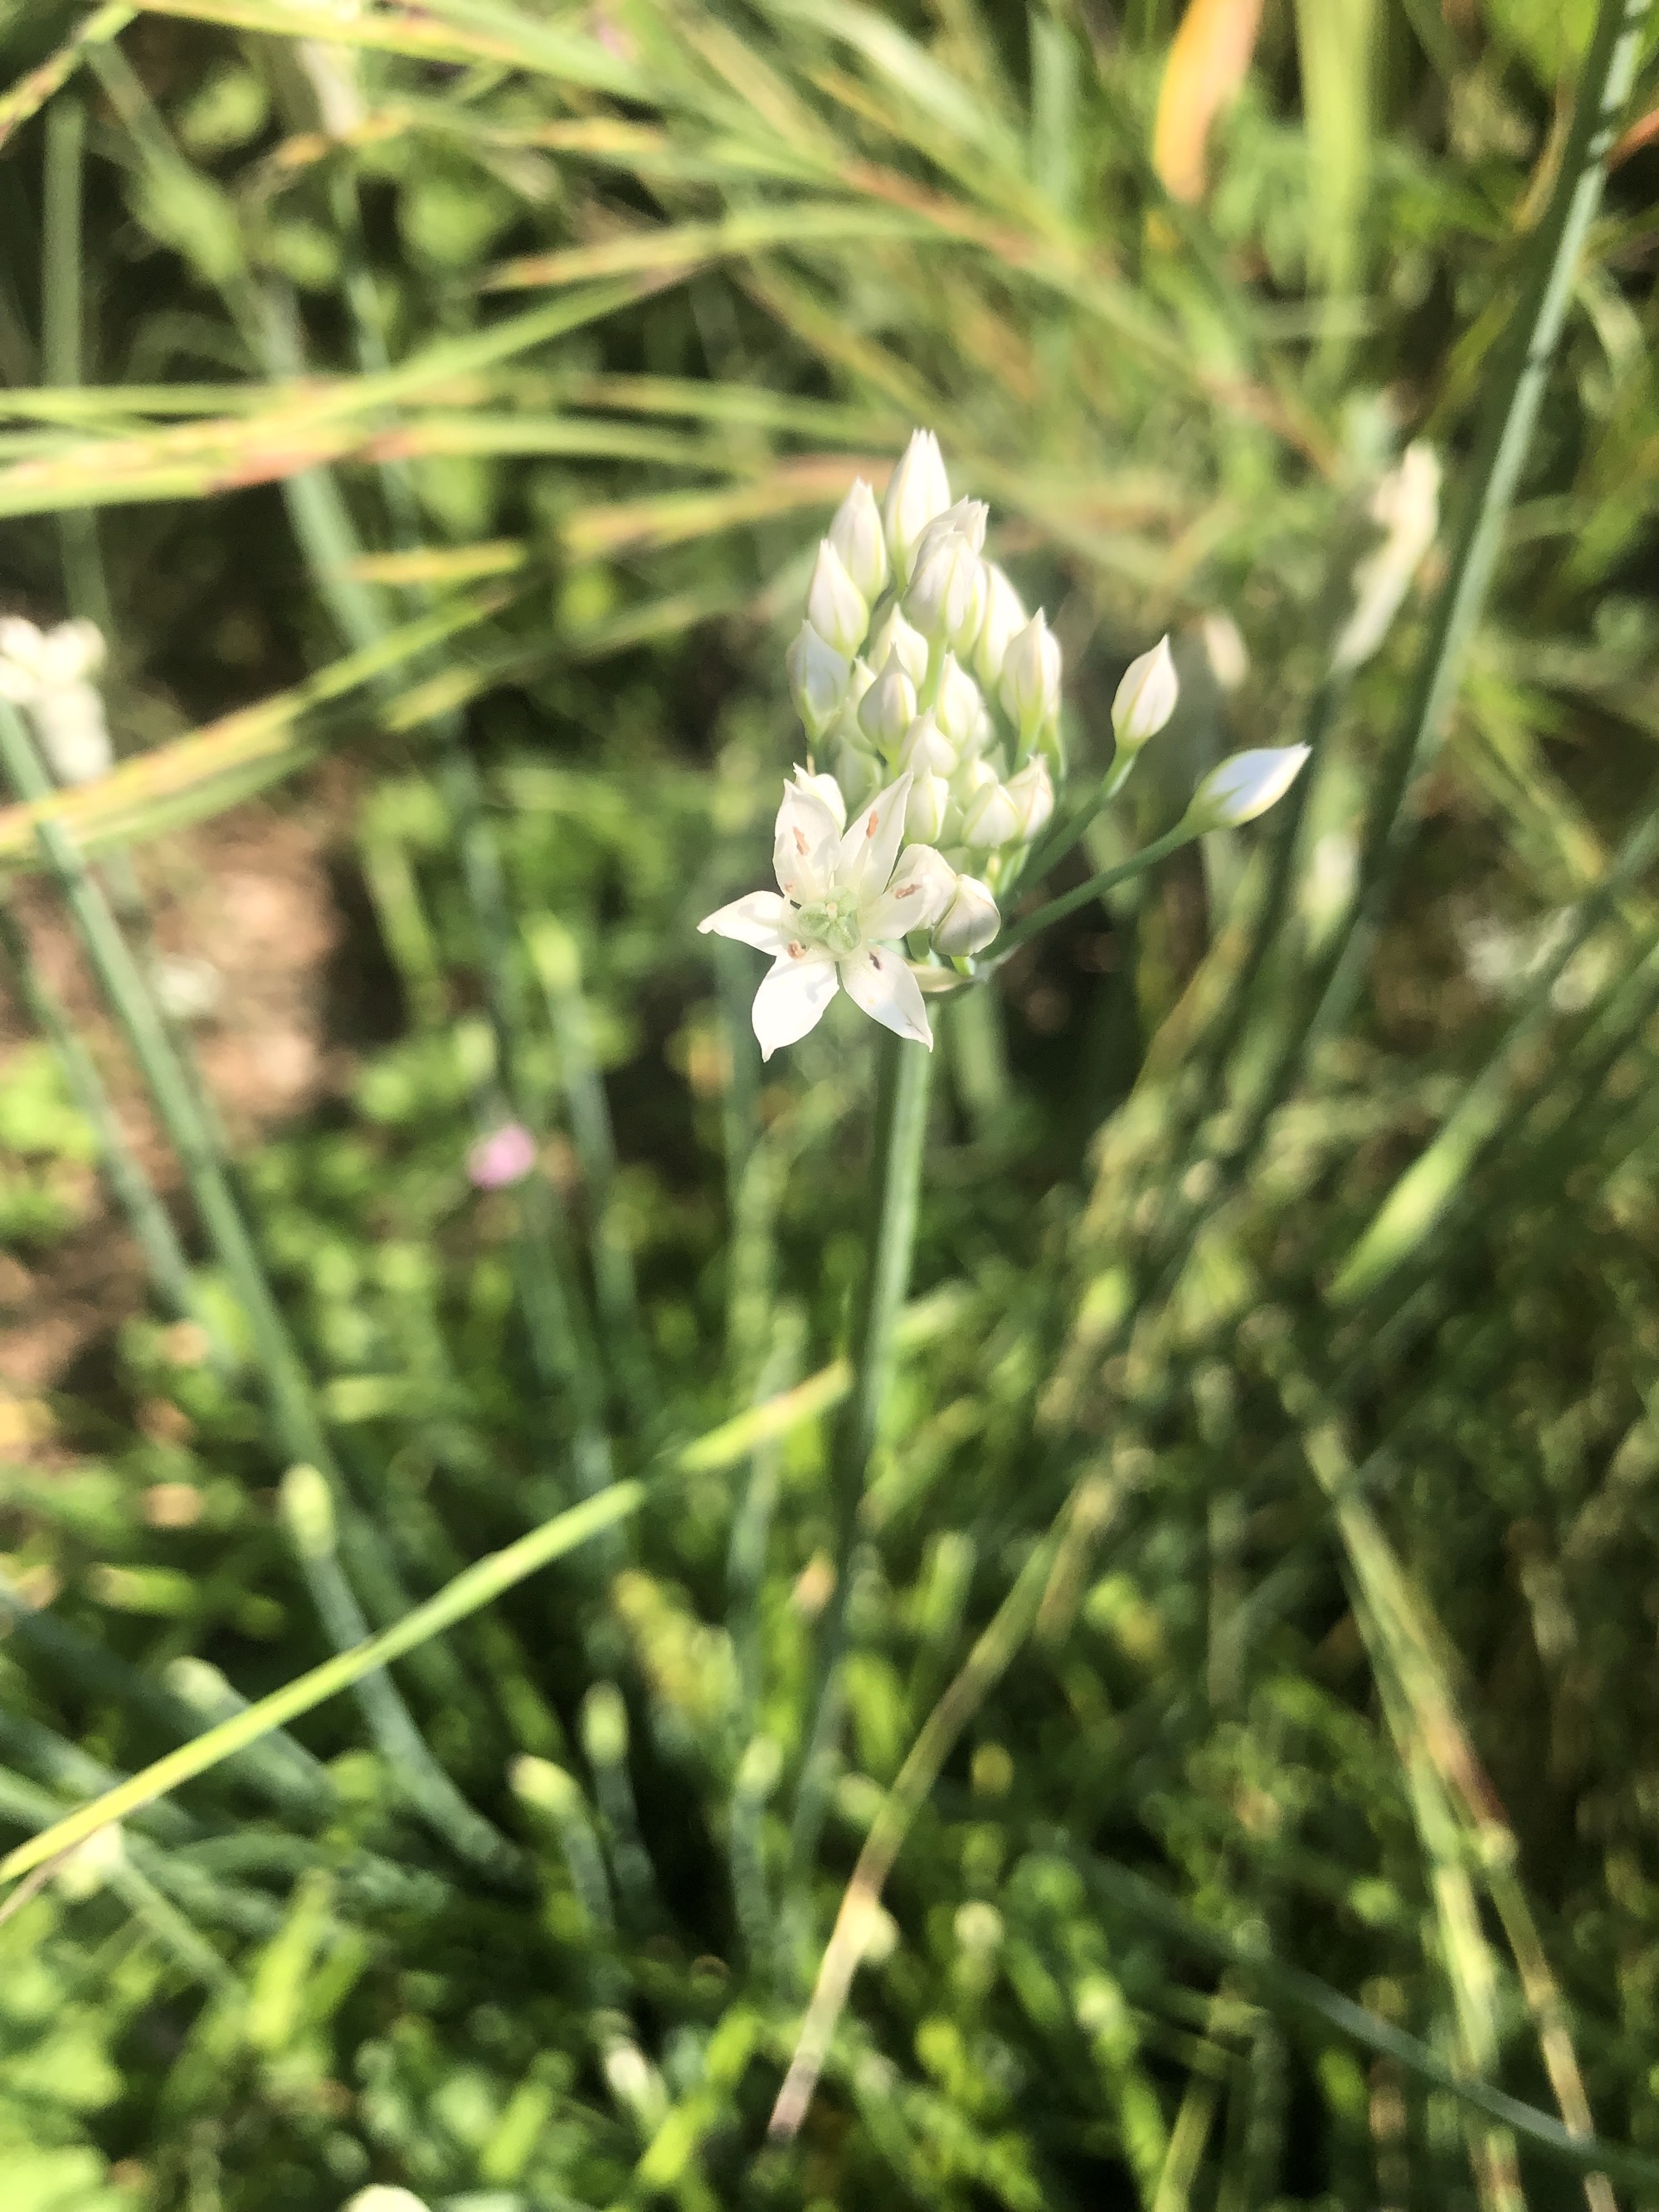 Garlic Chives in ditch along bikepath behind Fox Avenue in Madison, Wisconsin on August 18, 2021.